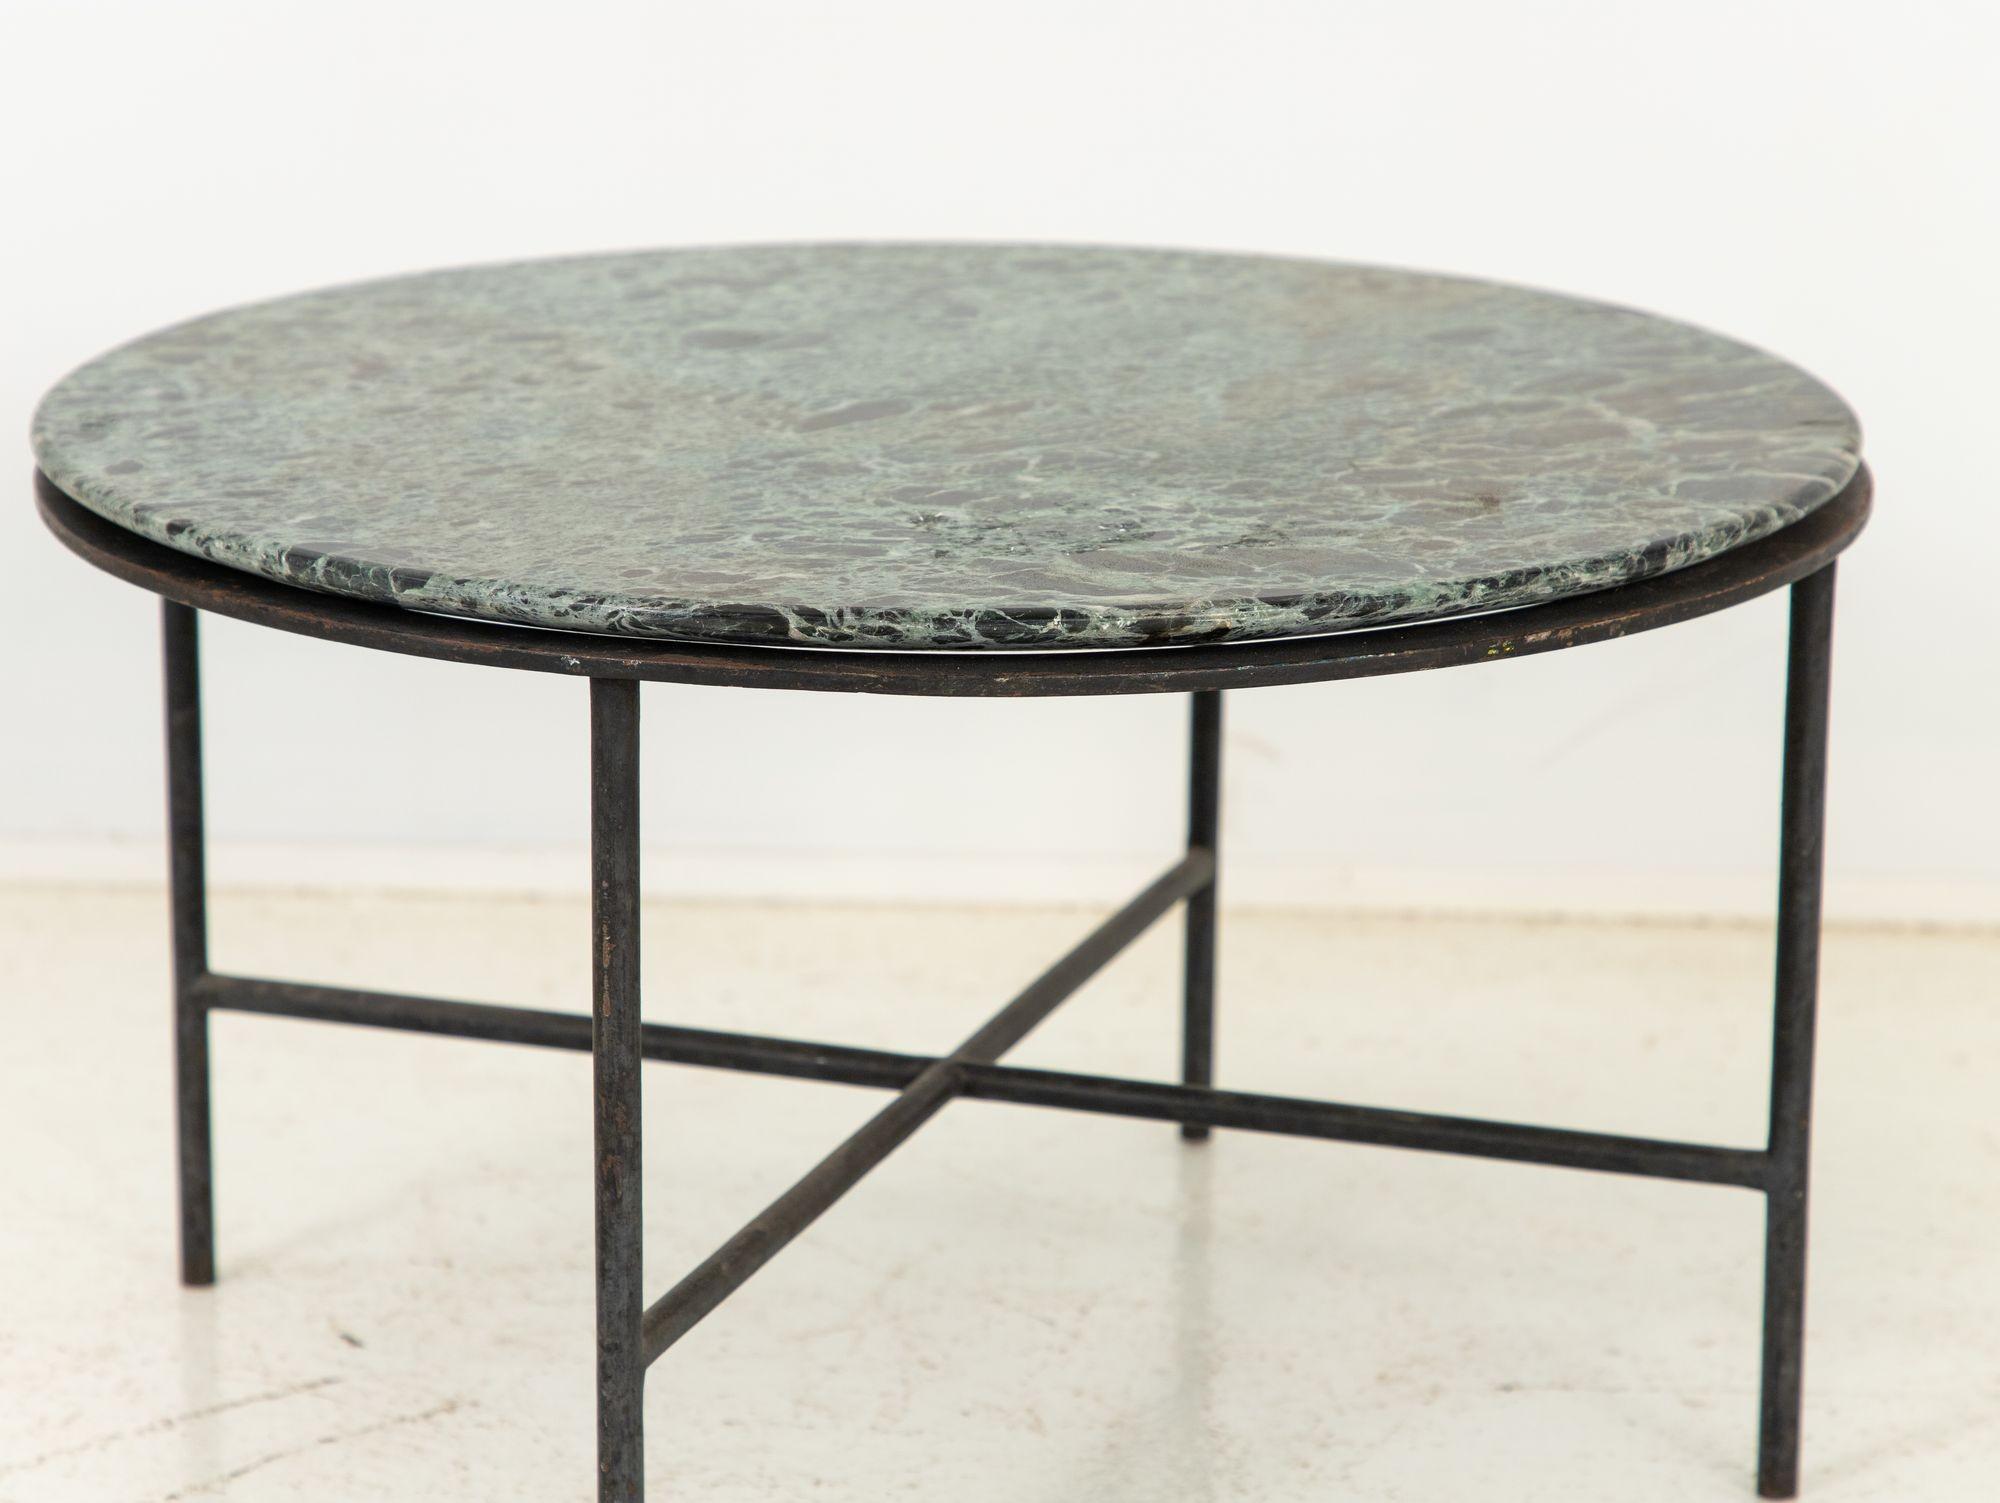 Round Iron base Cocktail Table with Green Marble Top, France 1960s In Good Condition For Sale In South Salem, NY